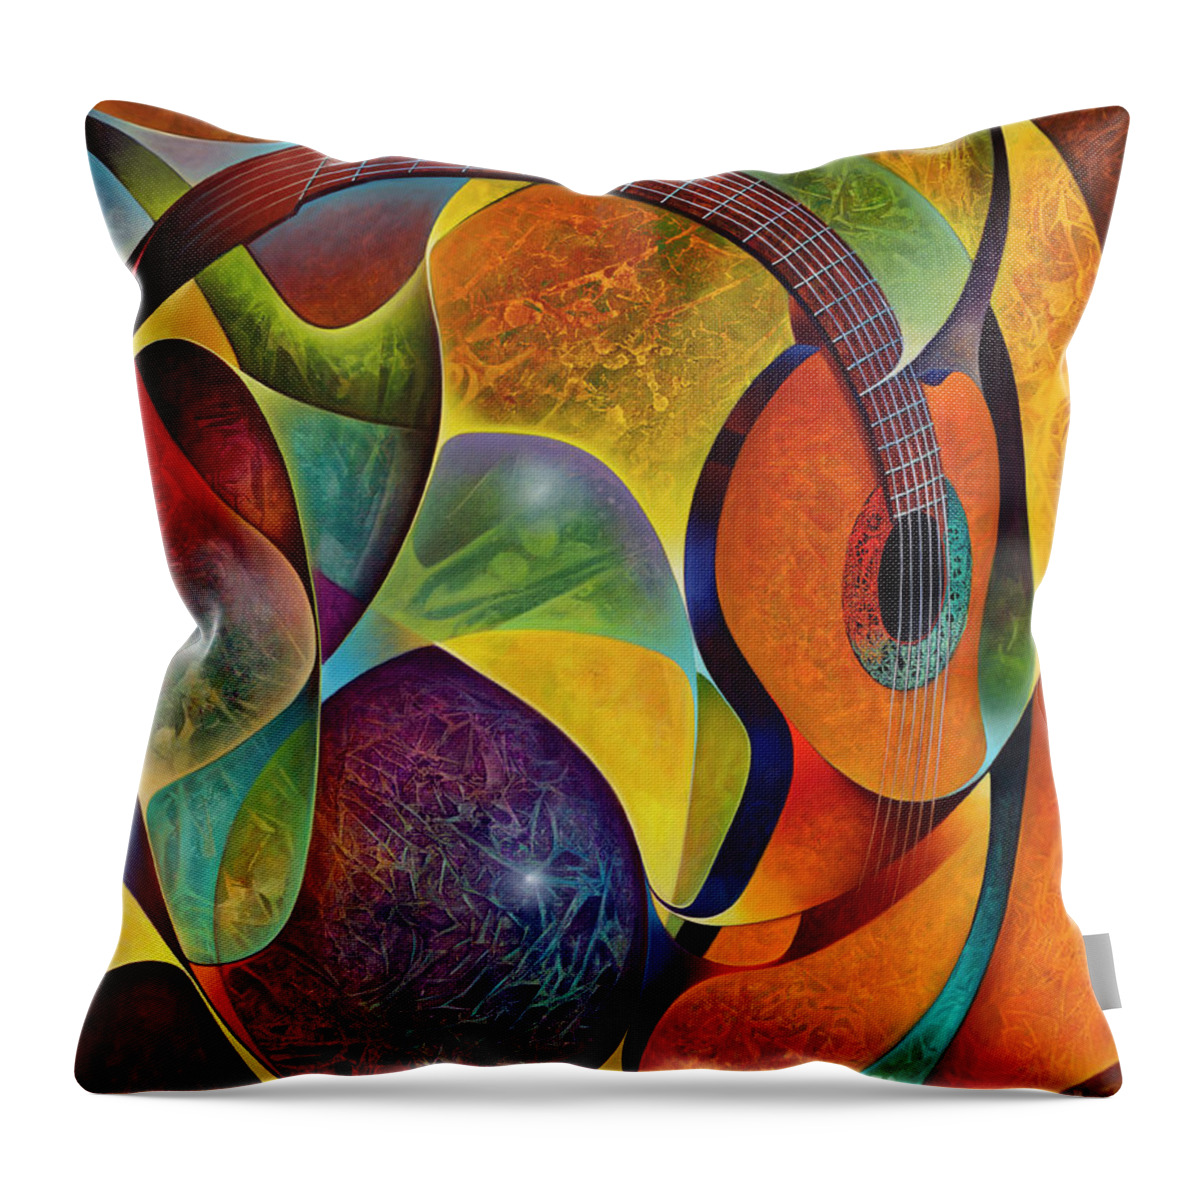 Guitars Throw Pillow featuring the painting Dynamic Guitars 3 by Ricardo Chavez-Mendez